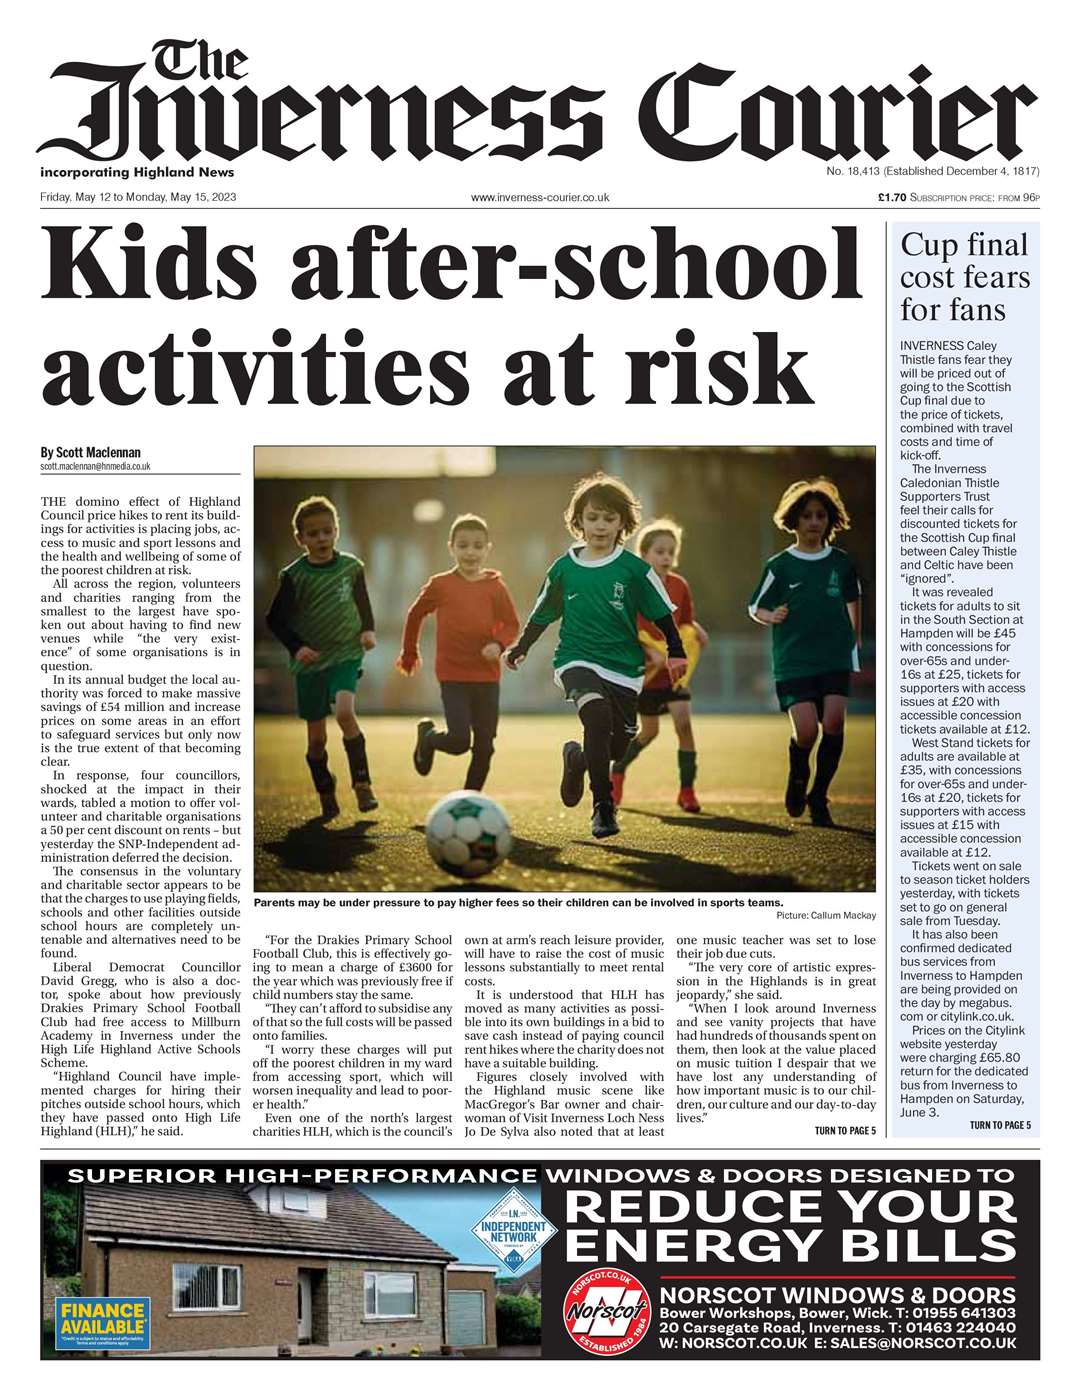 The Inverness Courier, May 12, front page.